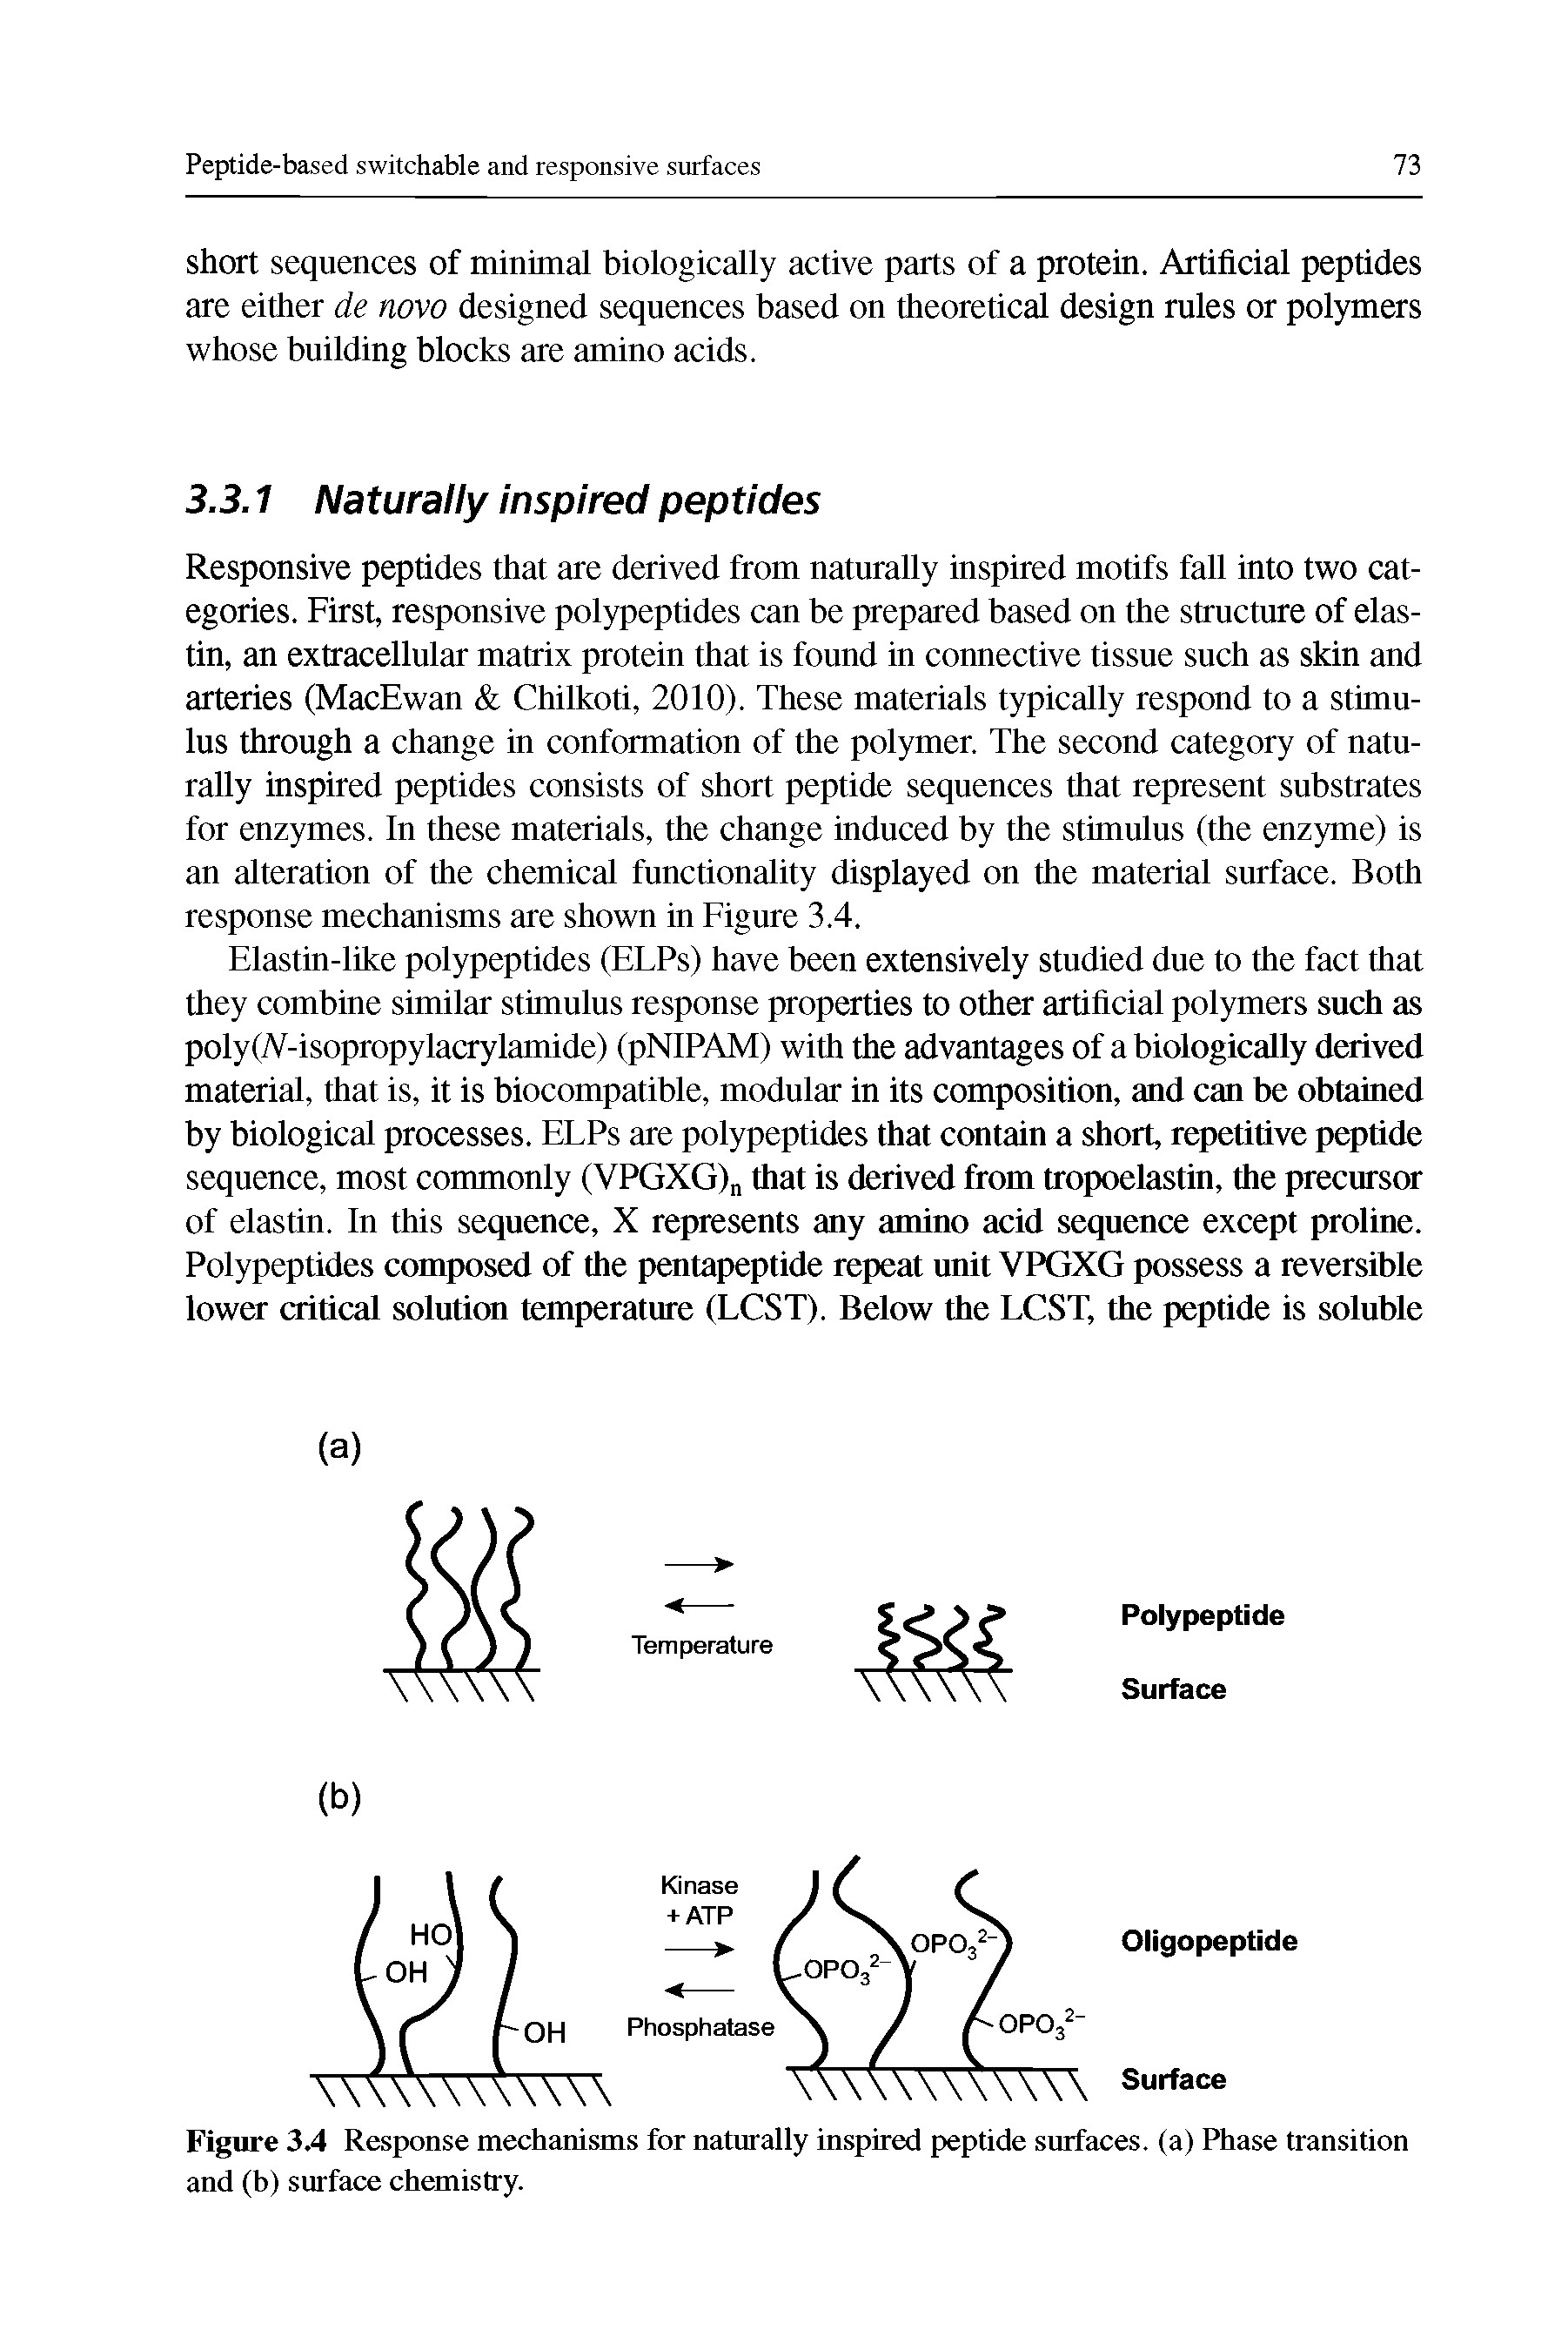 Figure 34 Response mechanisms for naturally inspired peptide surfaces, (a) Phase transition and (h) surface chemistry.